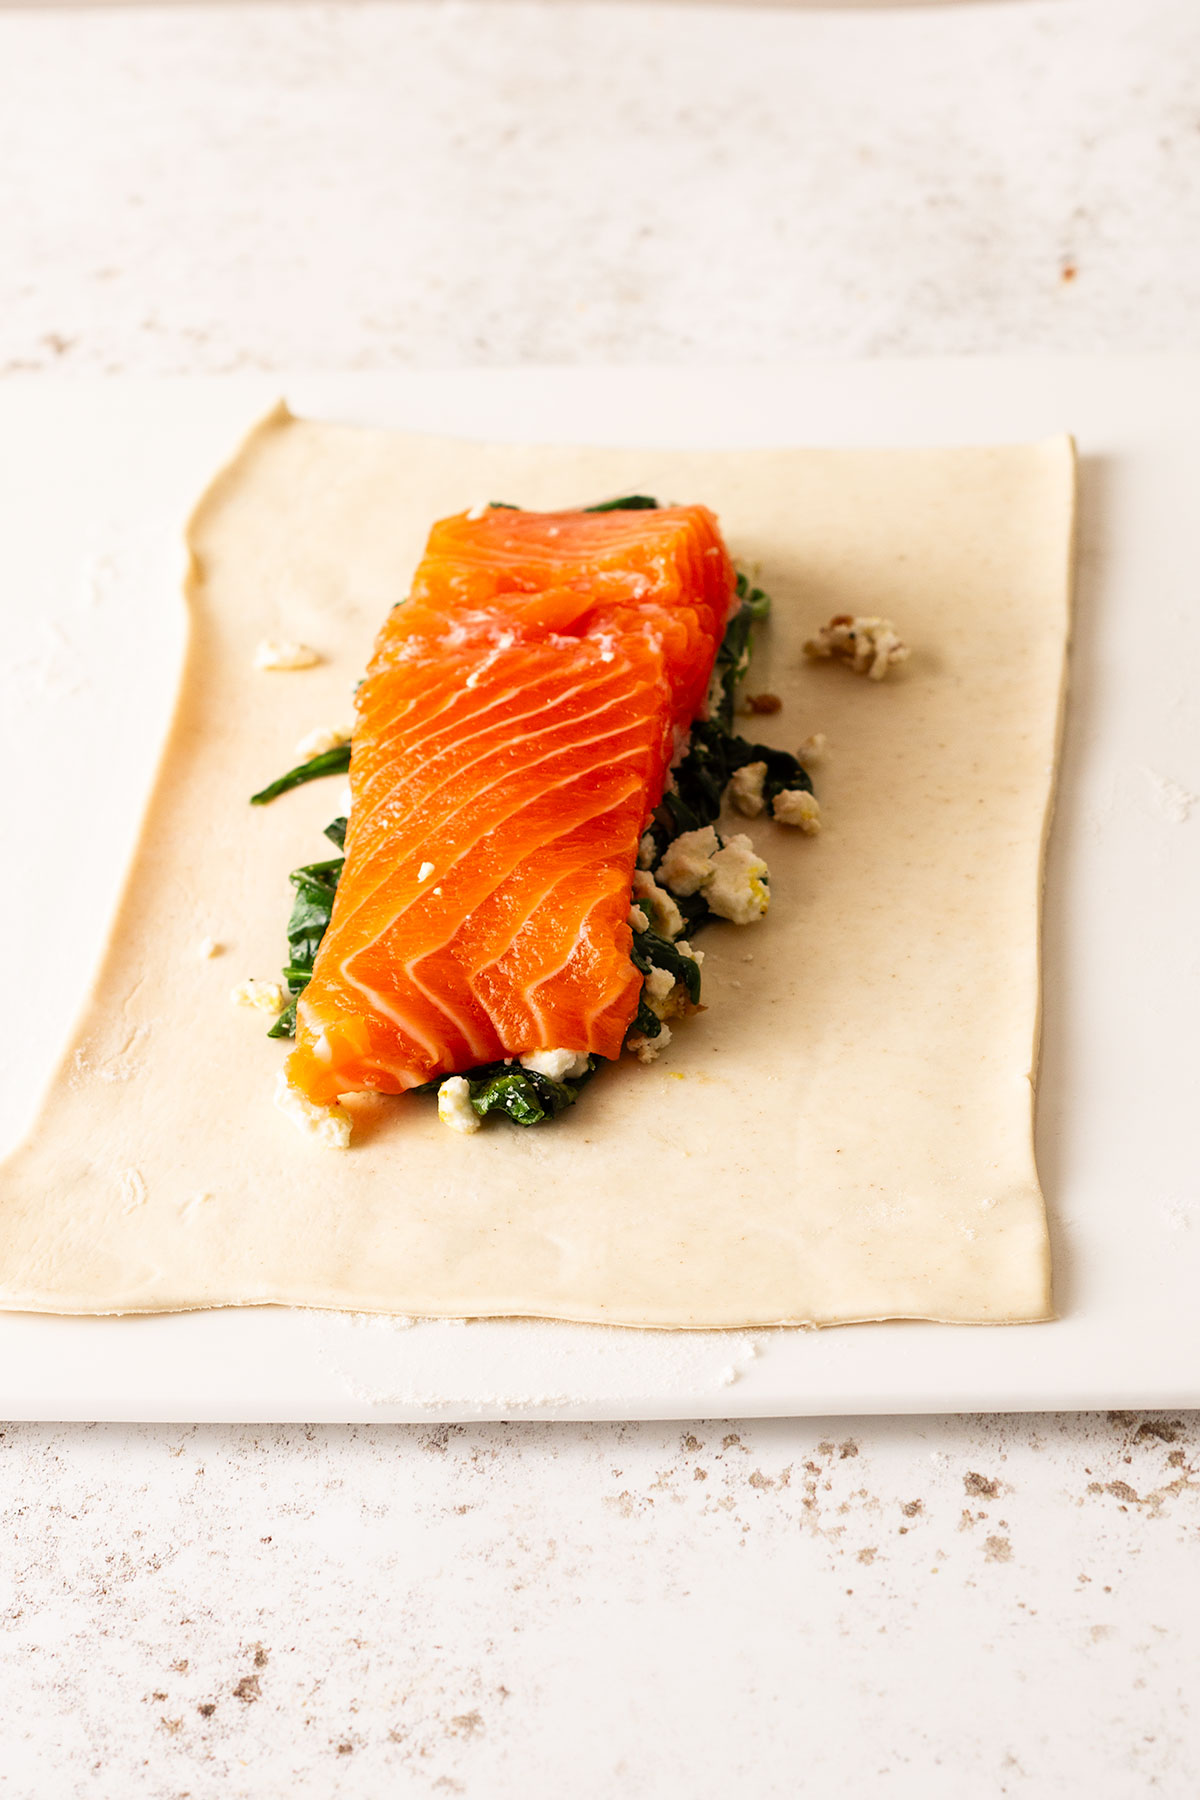 The salmon fillet in the centre of a rolled out pastry portion with the spinach and feta stuffing undrneath.